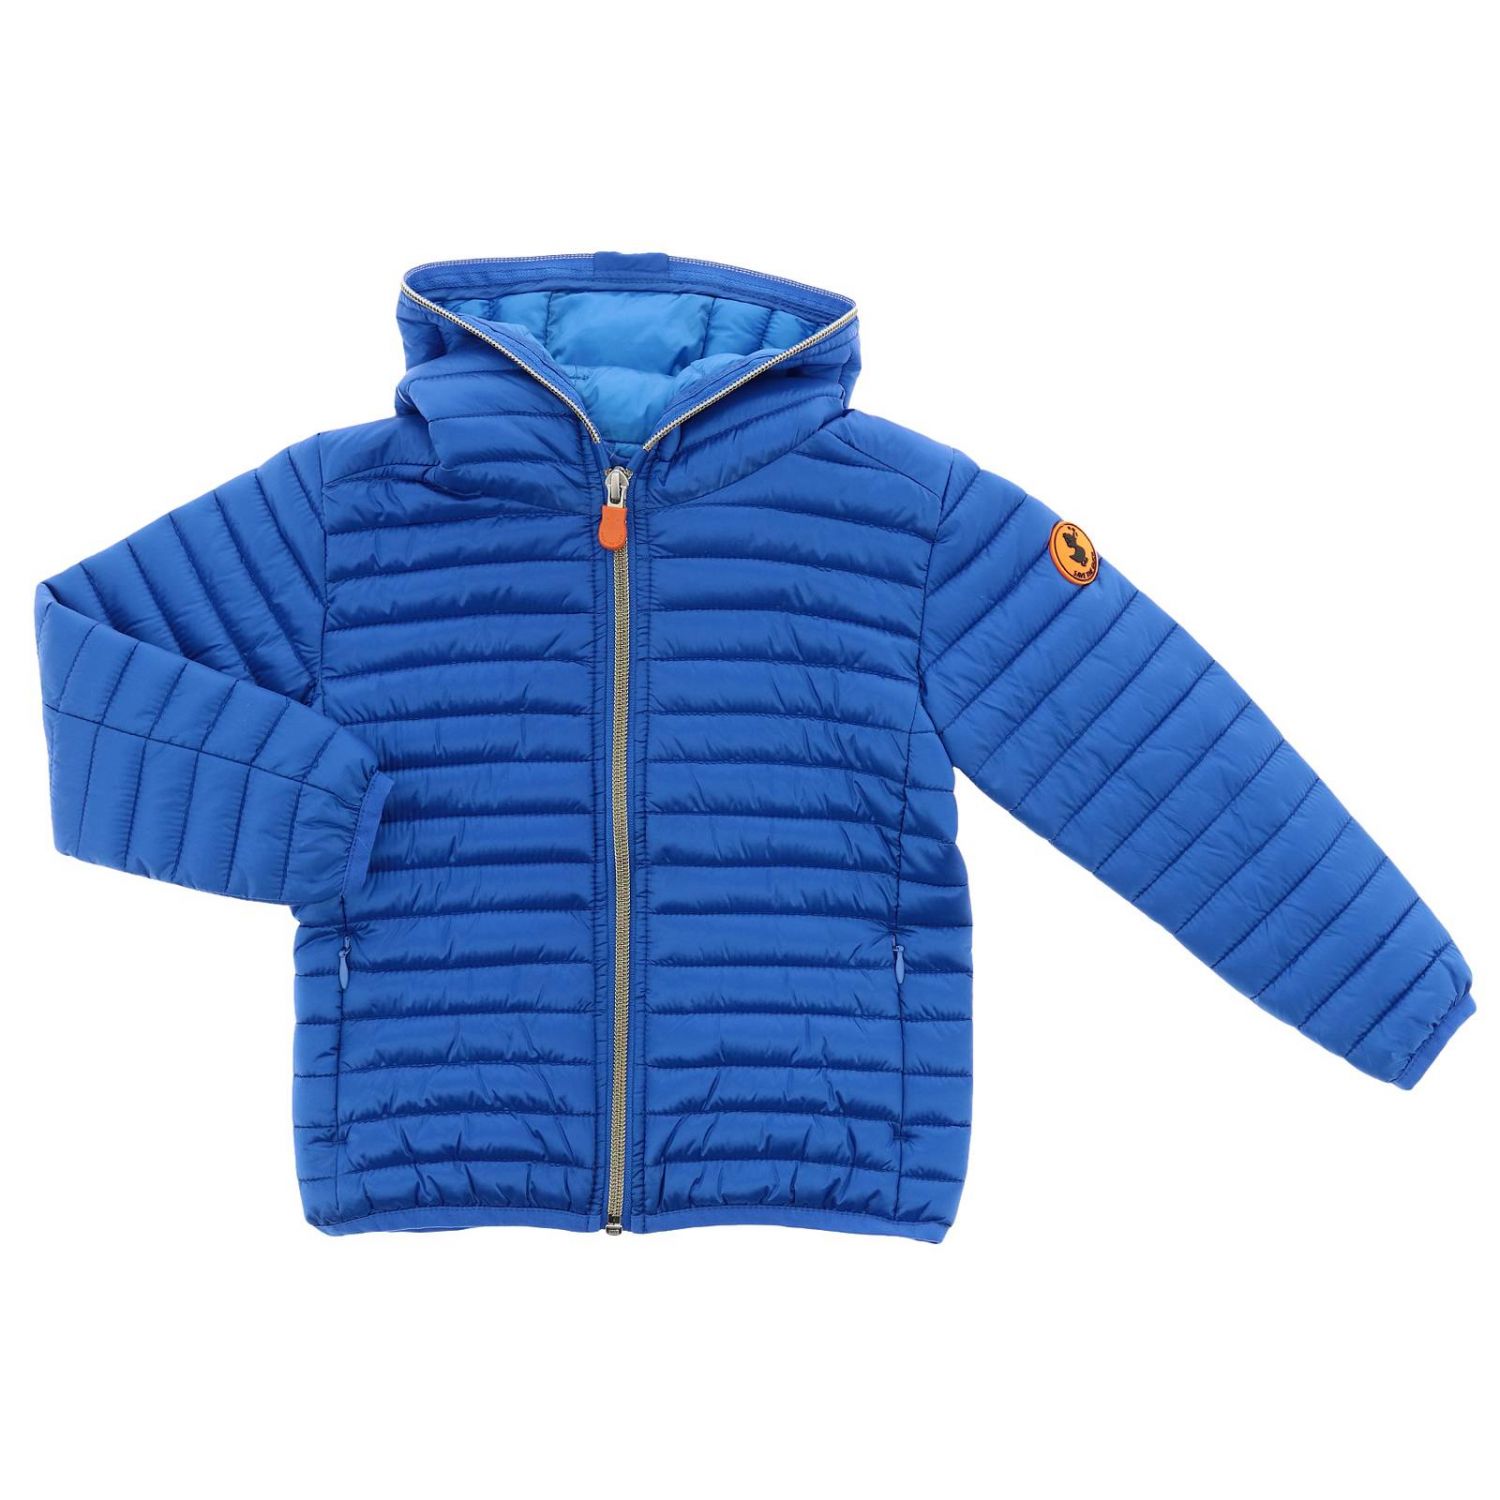 Save The Duck Outlet: Jacket kids - Gnawed Blue | Jacket Save The Duck ...